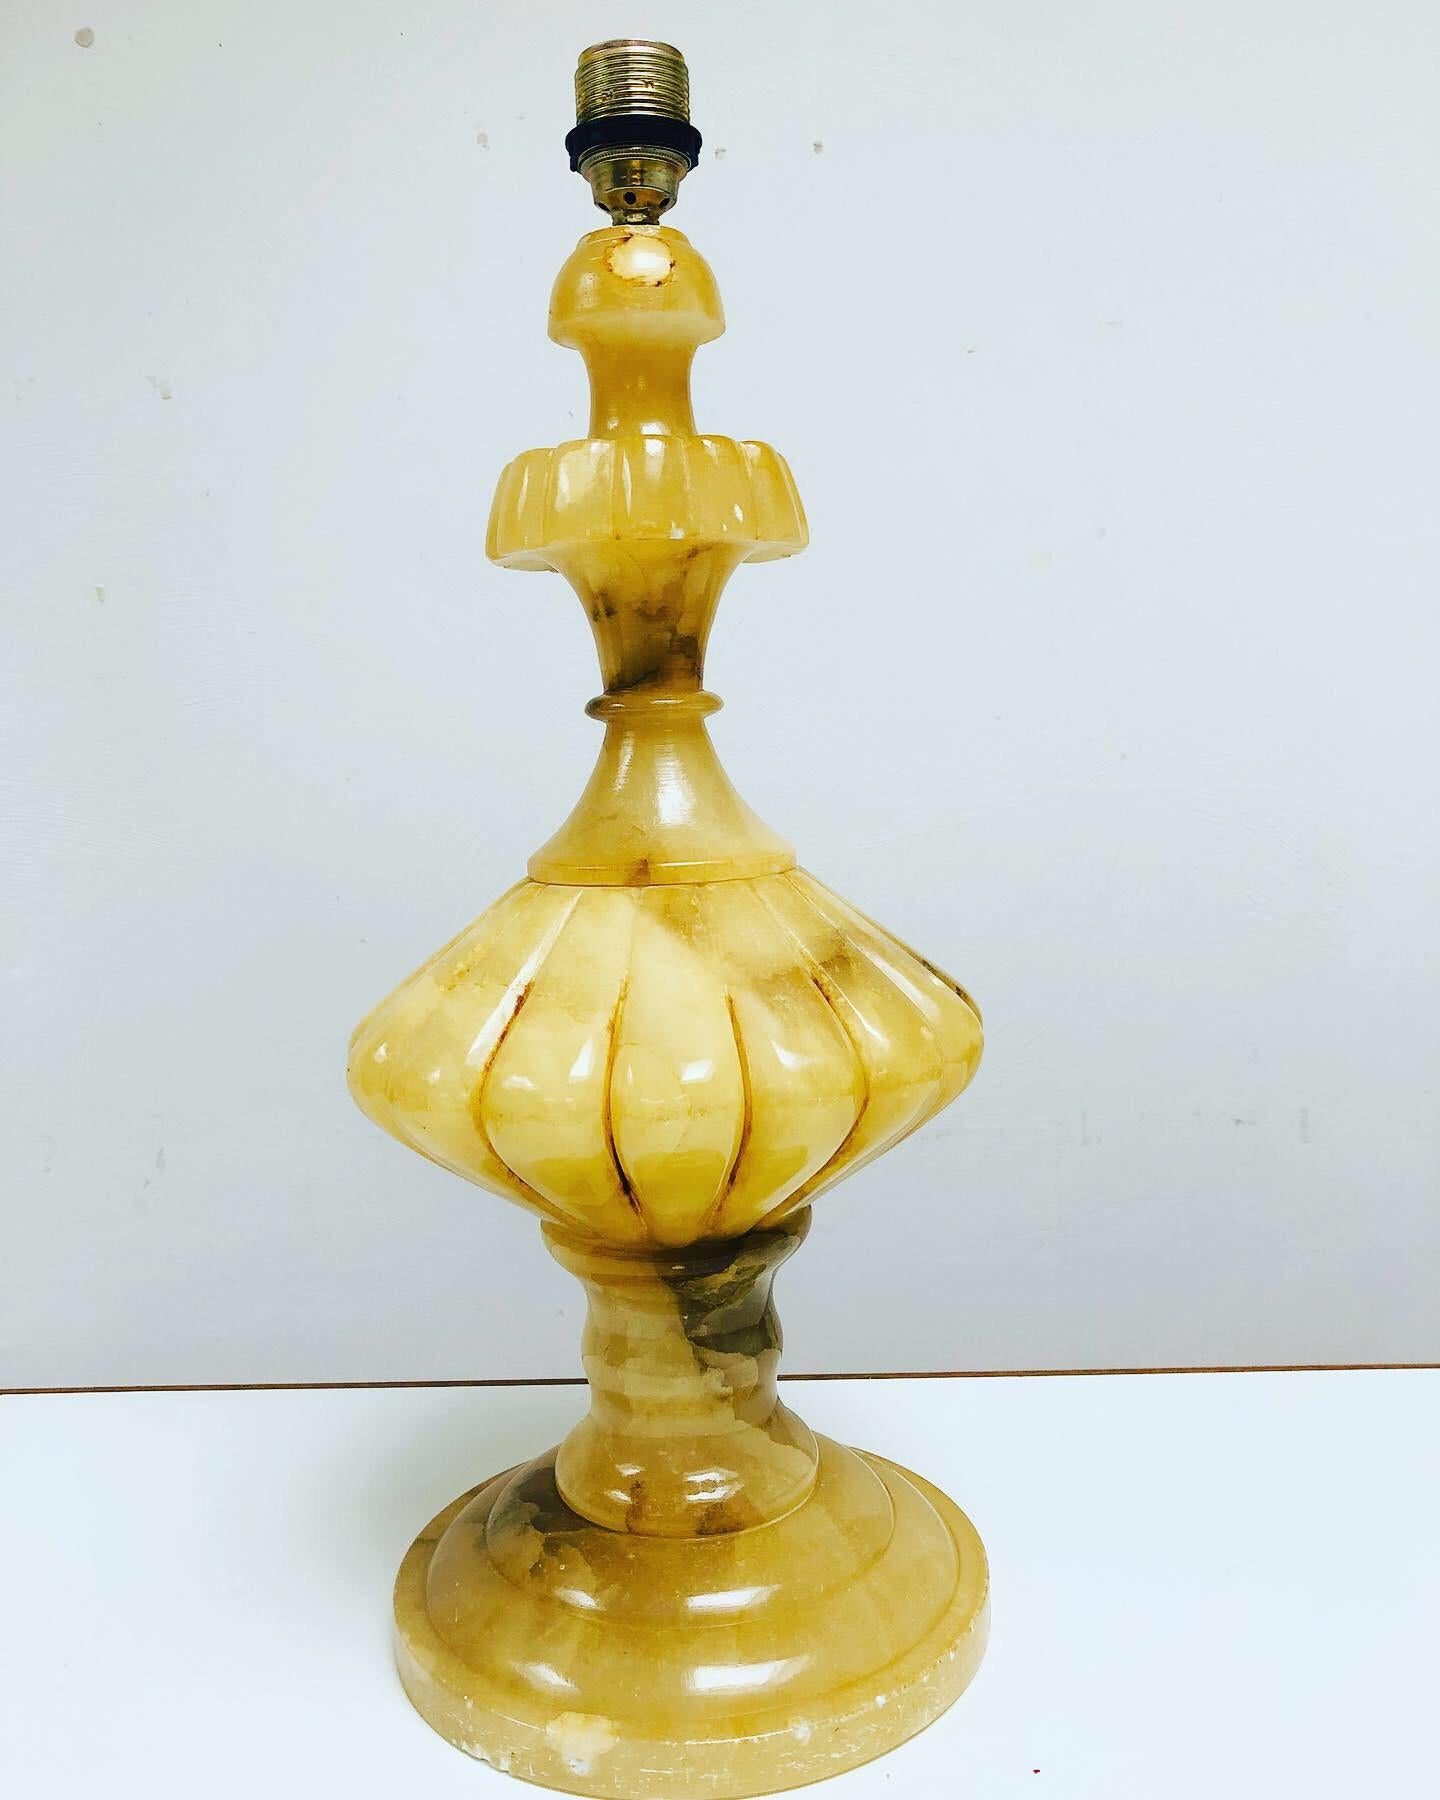 Stylish table lamp made of alabaster in Baroque style. The alabaster has a natural and warm yellowish colour with light brown veins. 